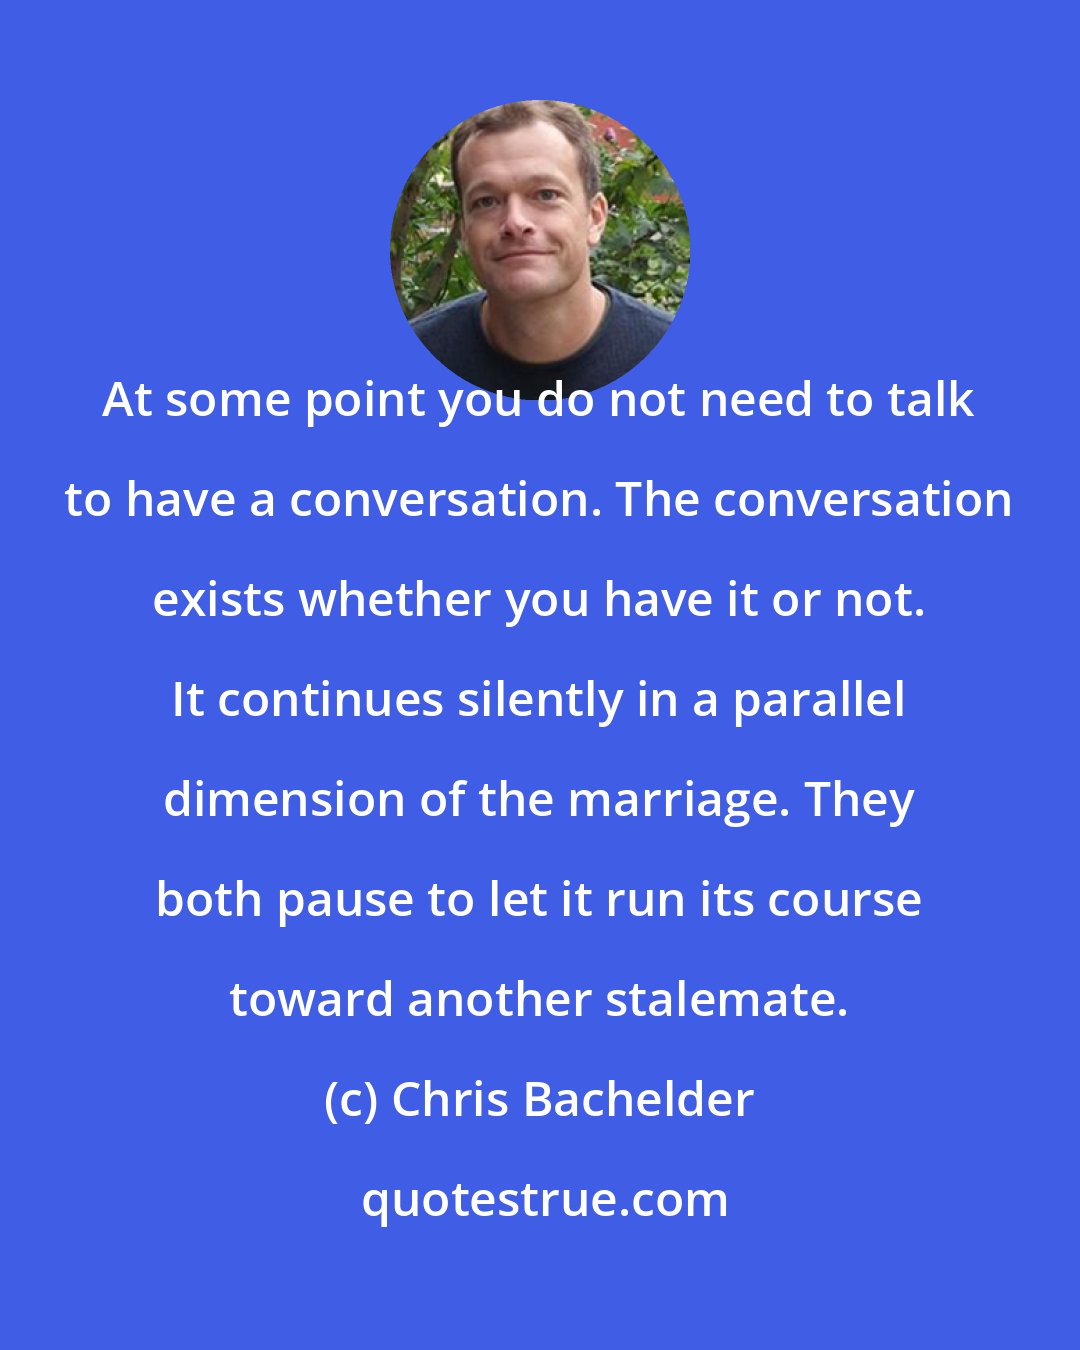 Chris Bachelder: At some point you do not need to talk to have a conversation. The conversation exists whether you have it or not. It continues silently in a parallel dimension of the marriage. They both pause to let it run its course toward another stalemate.